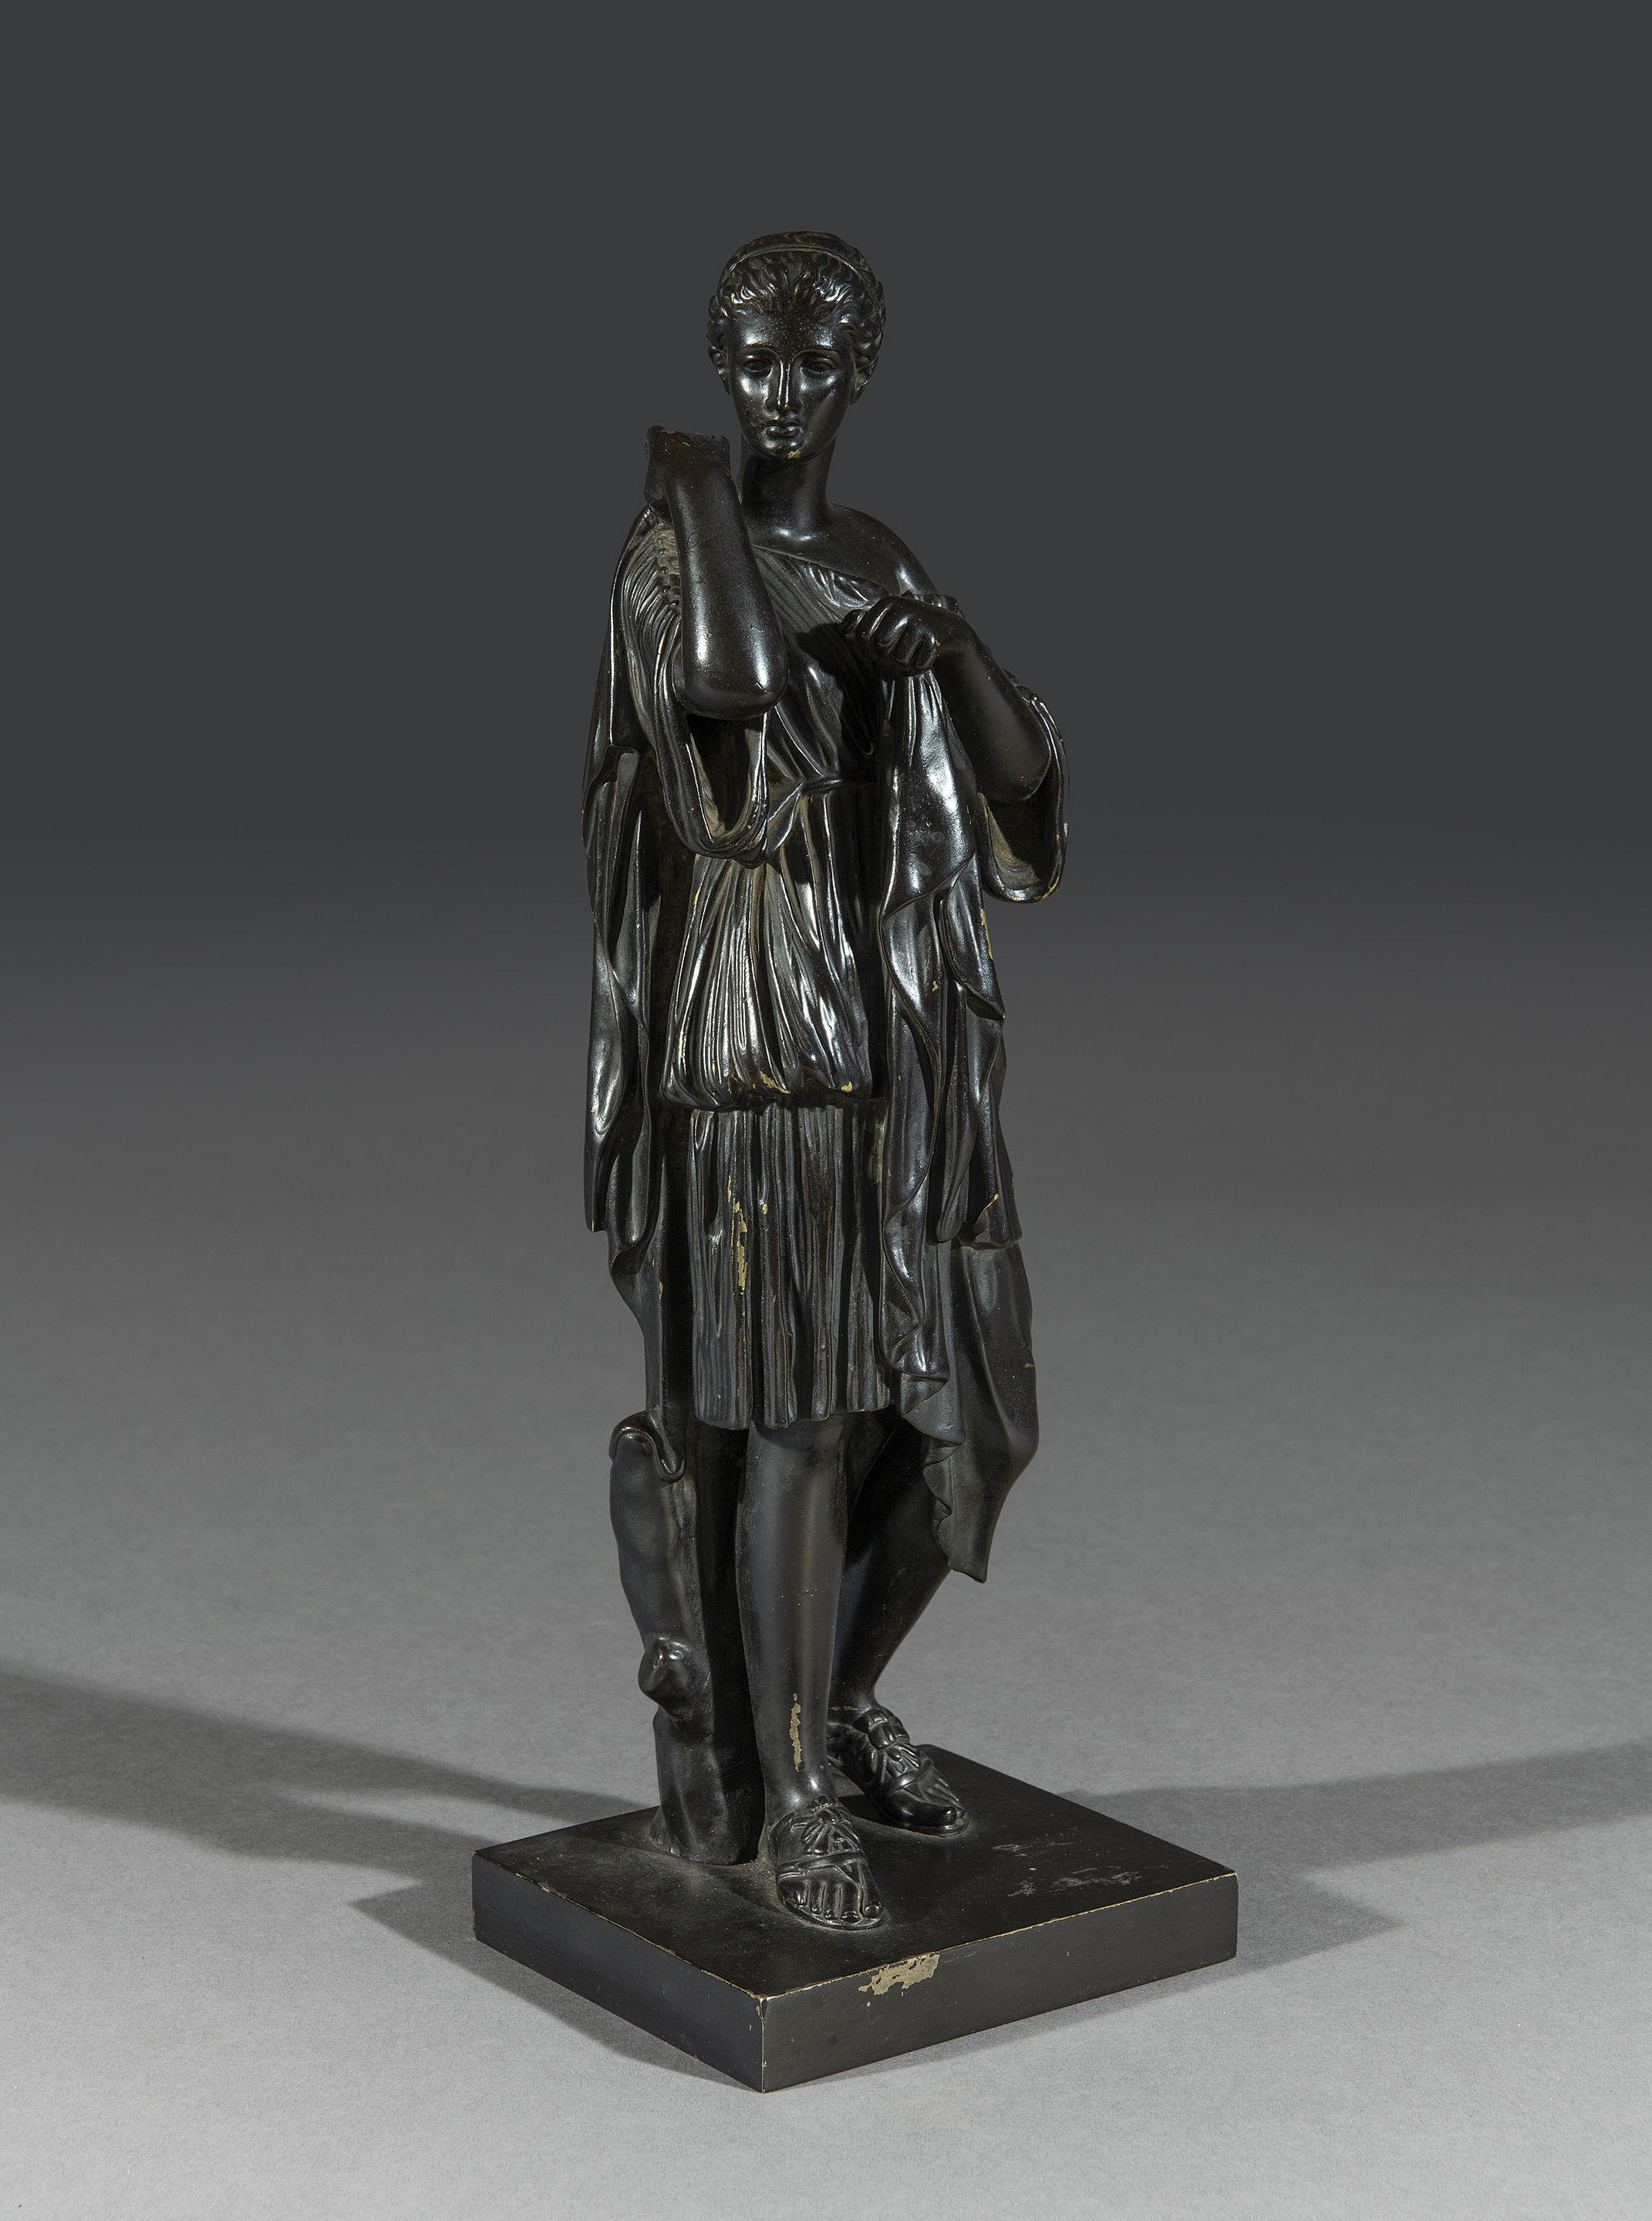 Bronze figure of ‘Diane de Gabies’ cast after the antique marble in the Louvre. The figure, standing by a tree stump, dressed in a chiton bound by two belts, pinning her cloak with her right hand. Original dark patination. Catalogued as ‘Diane De